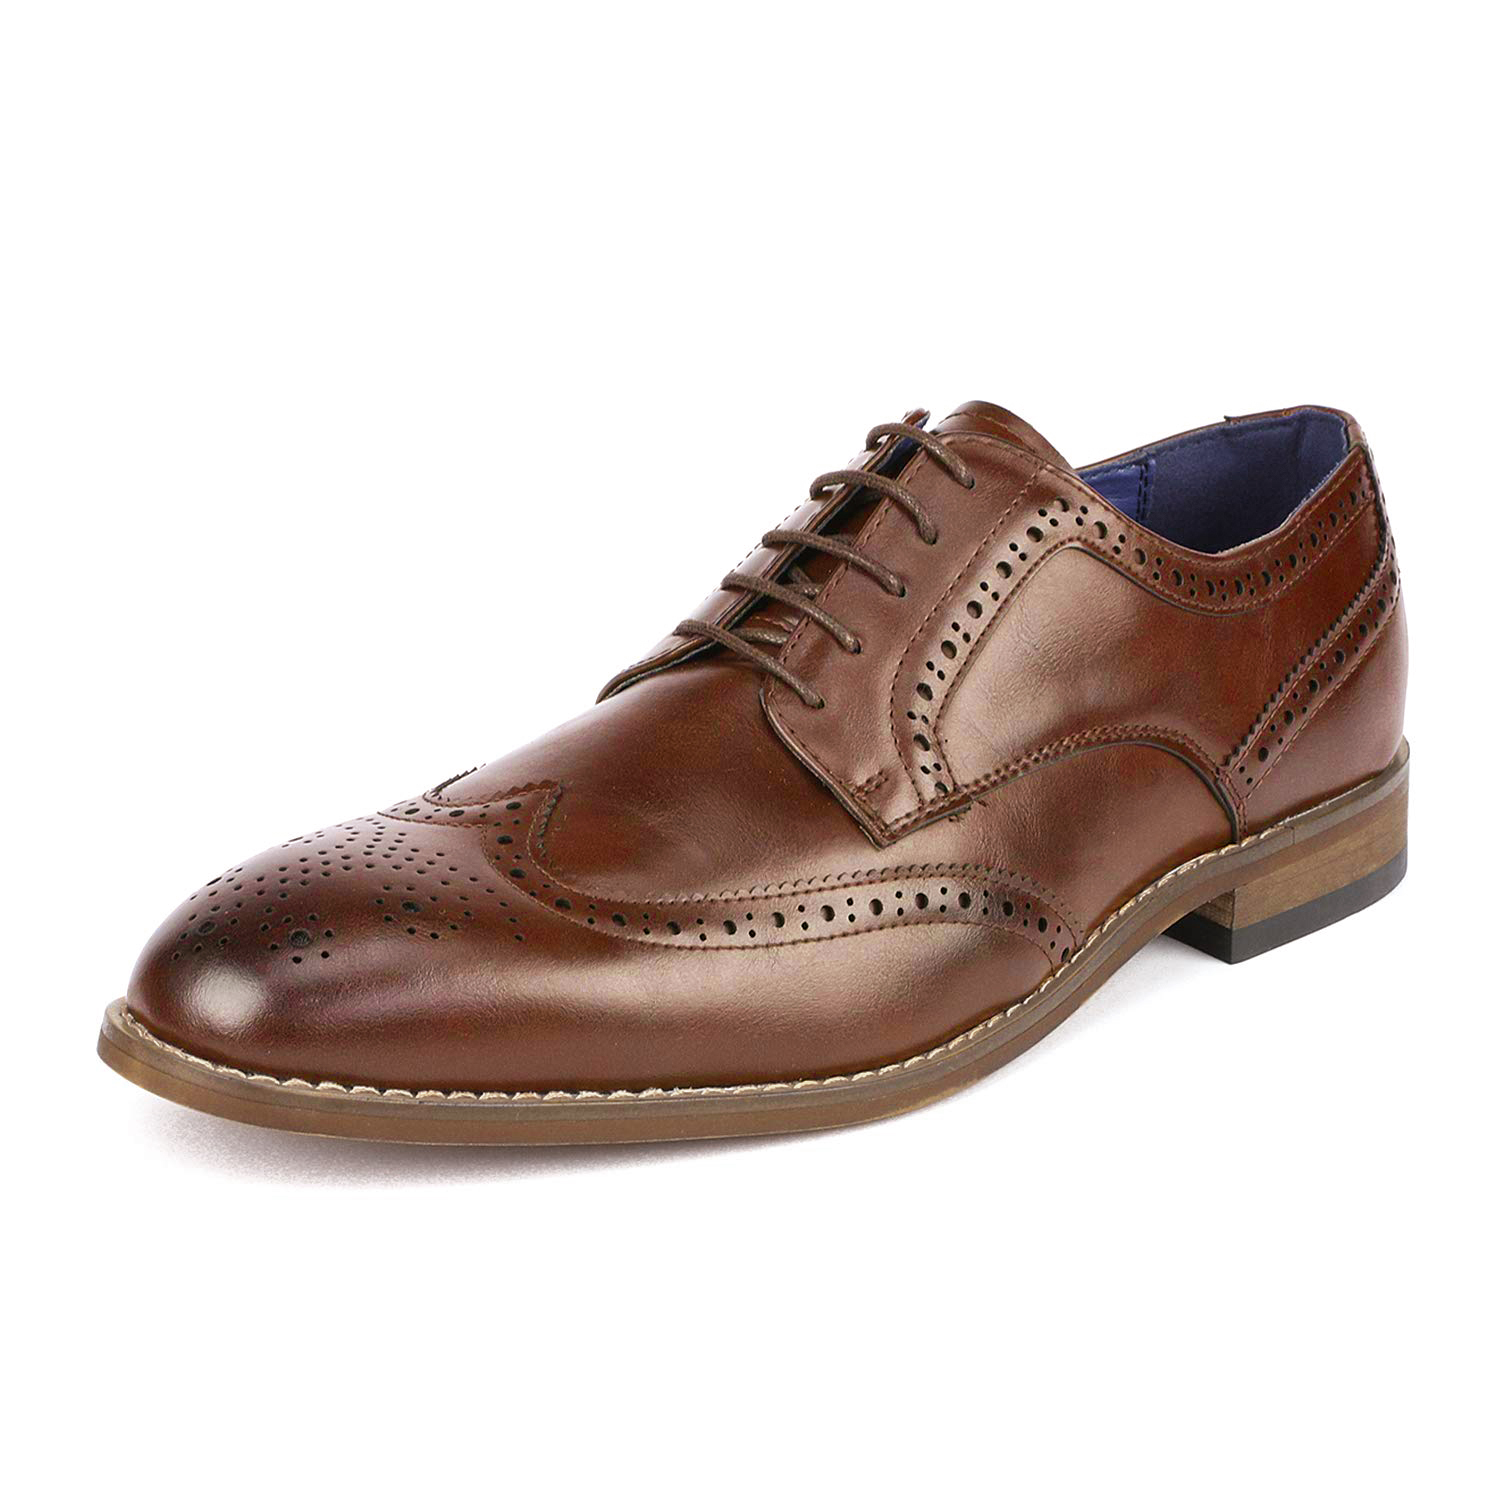 Bruno Marc Mens Brogue Oxford Shoes Lace up Wing Tip Dress Shoes Casual Shoes WILLIAM_2 BROWN Size 8 - image 1 of 5